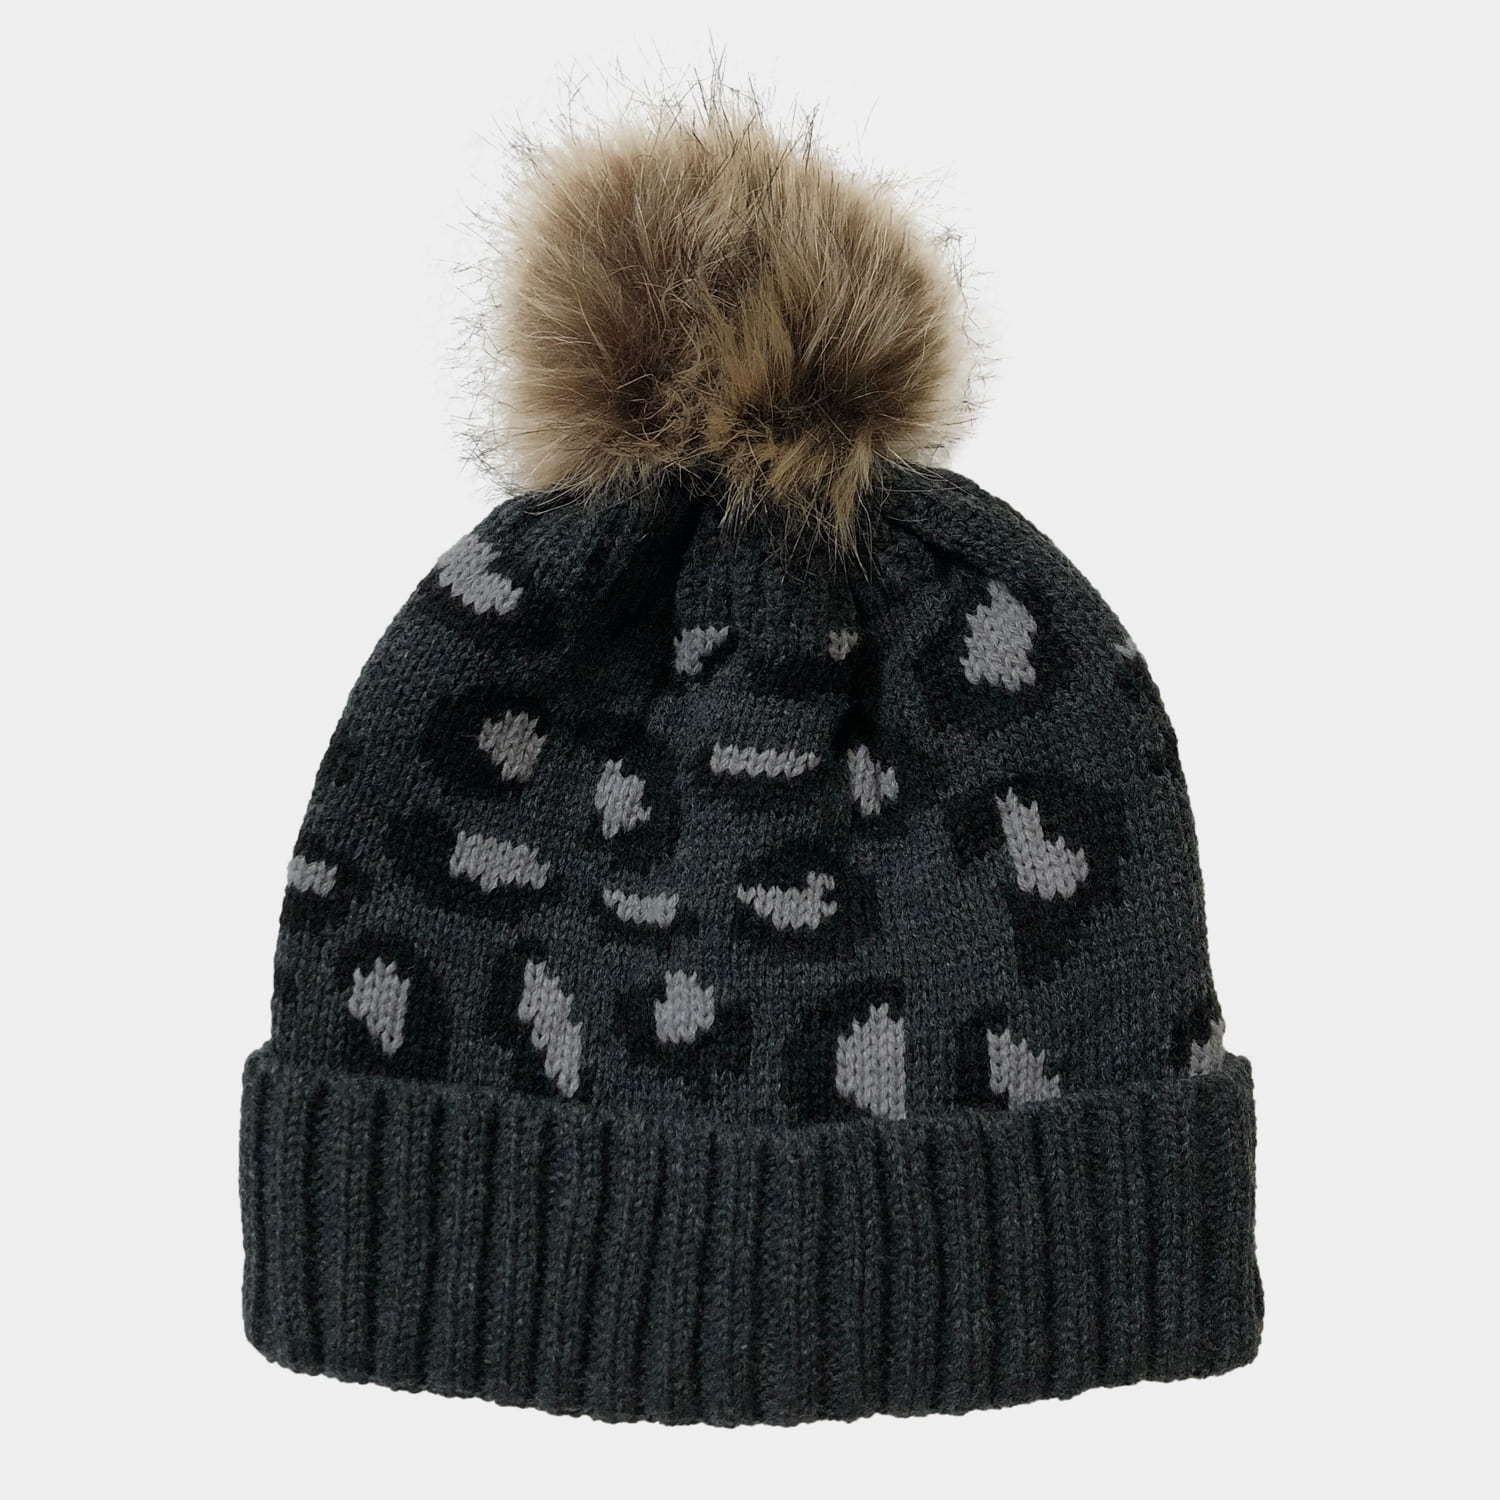 H00004 Leopard Jacquard Ladies Knitted Hat